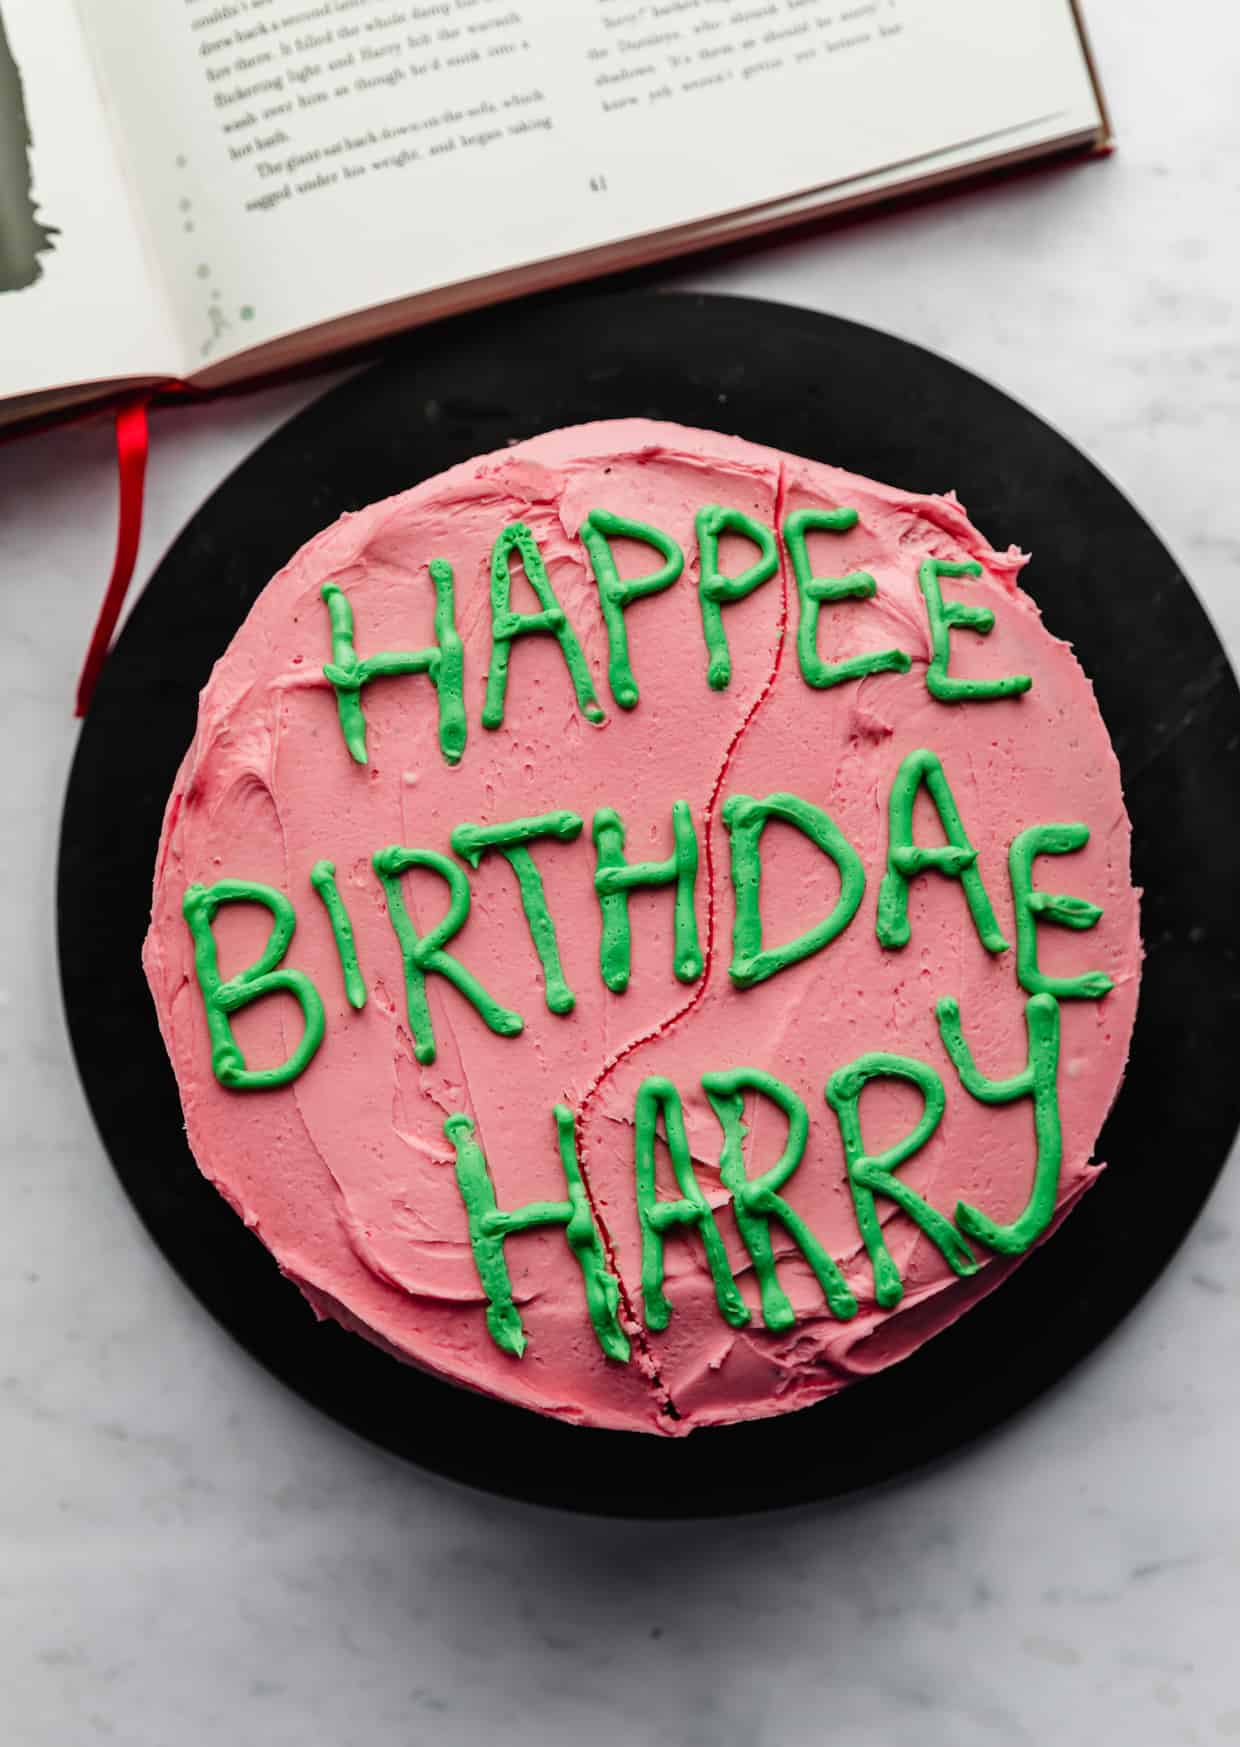 A pink cake with green frosting writing "Happy birthdae Harry".